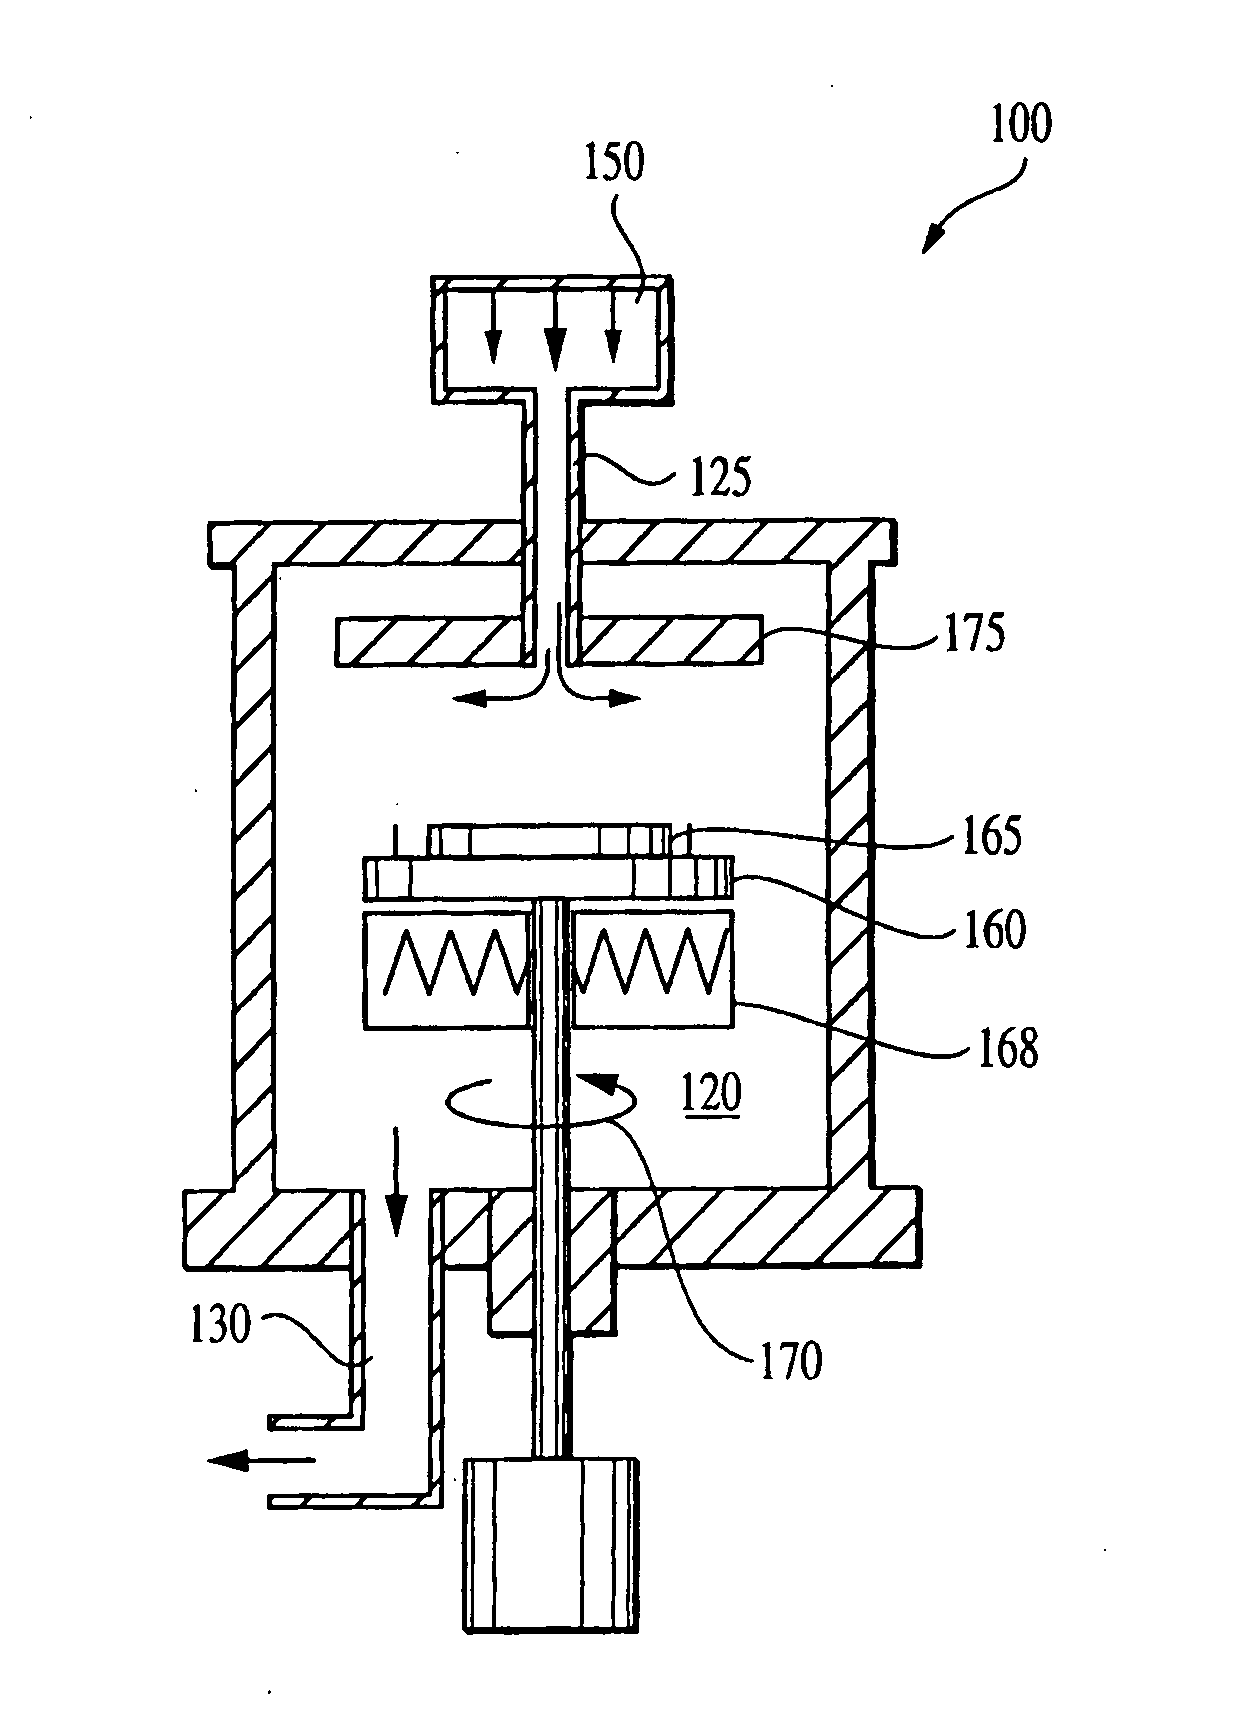 Feedback control of sub-atmospheric chemical vapor deposition processes